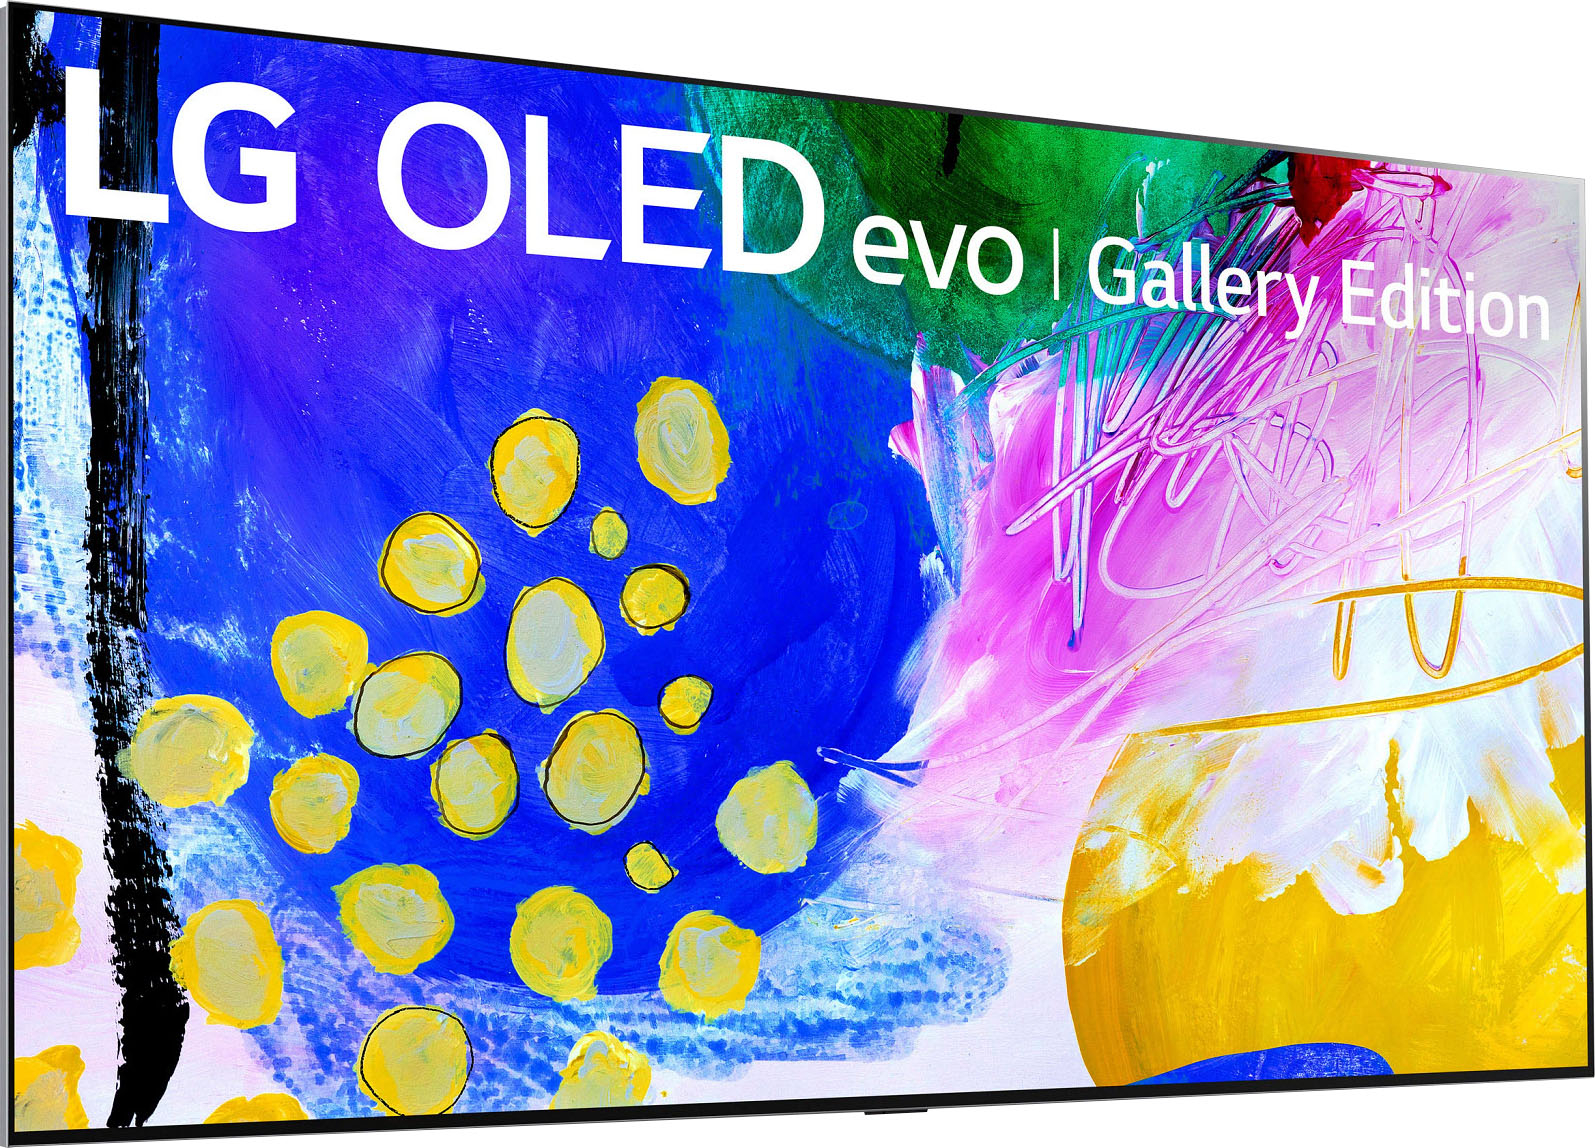 LG A2 OLED TV review: the best cheap OLED of the year